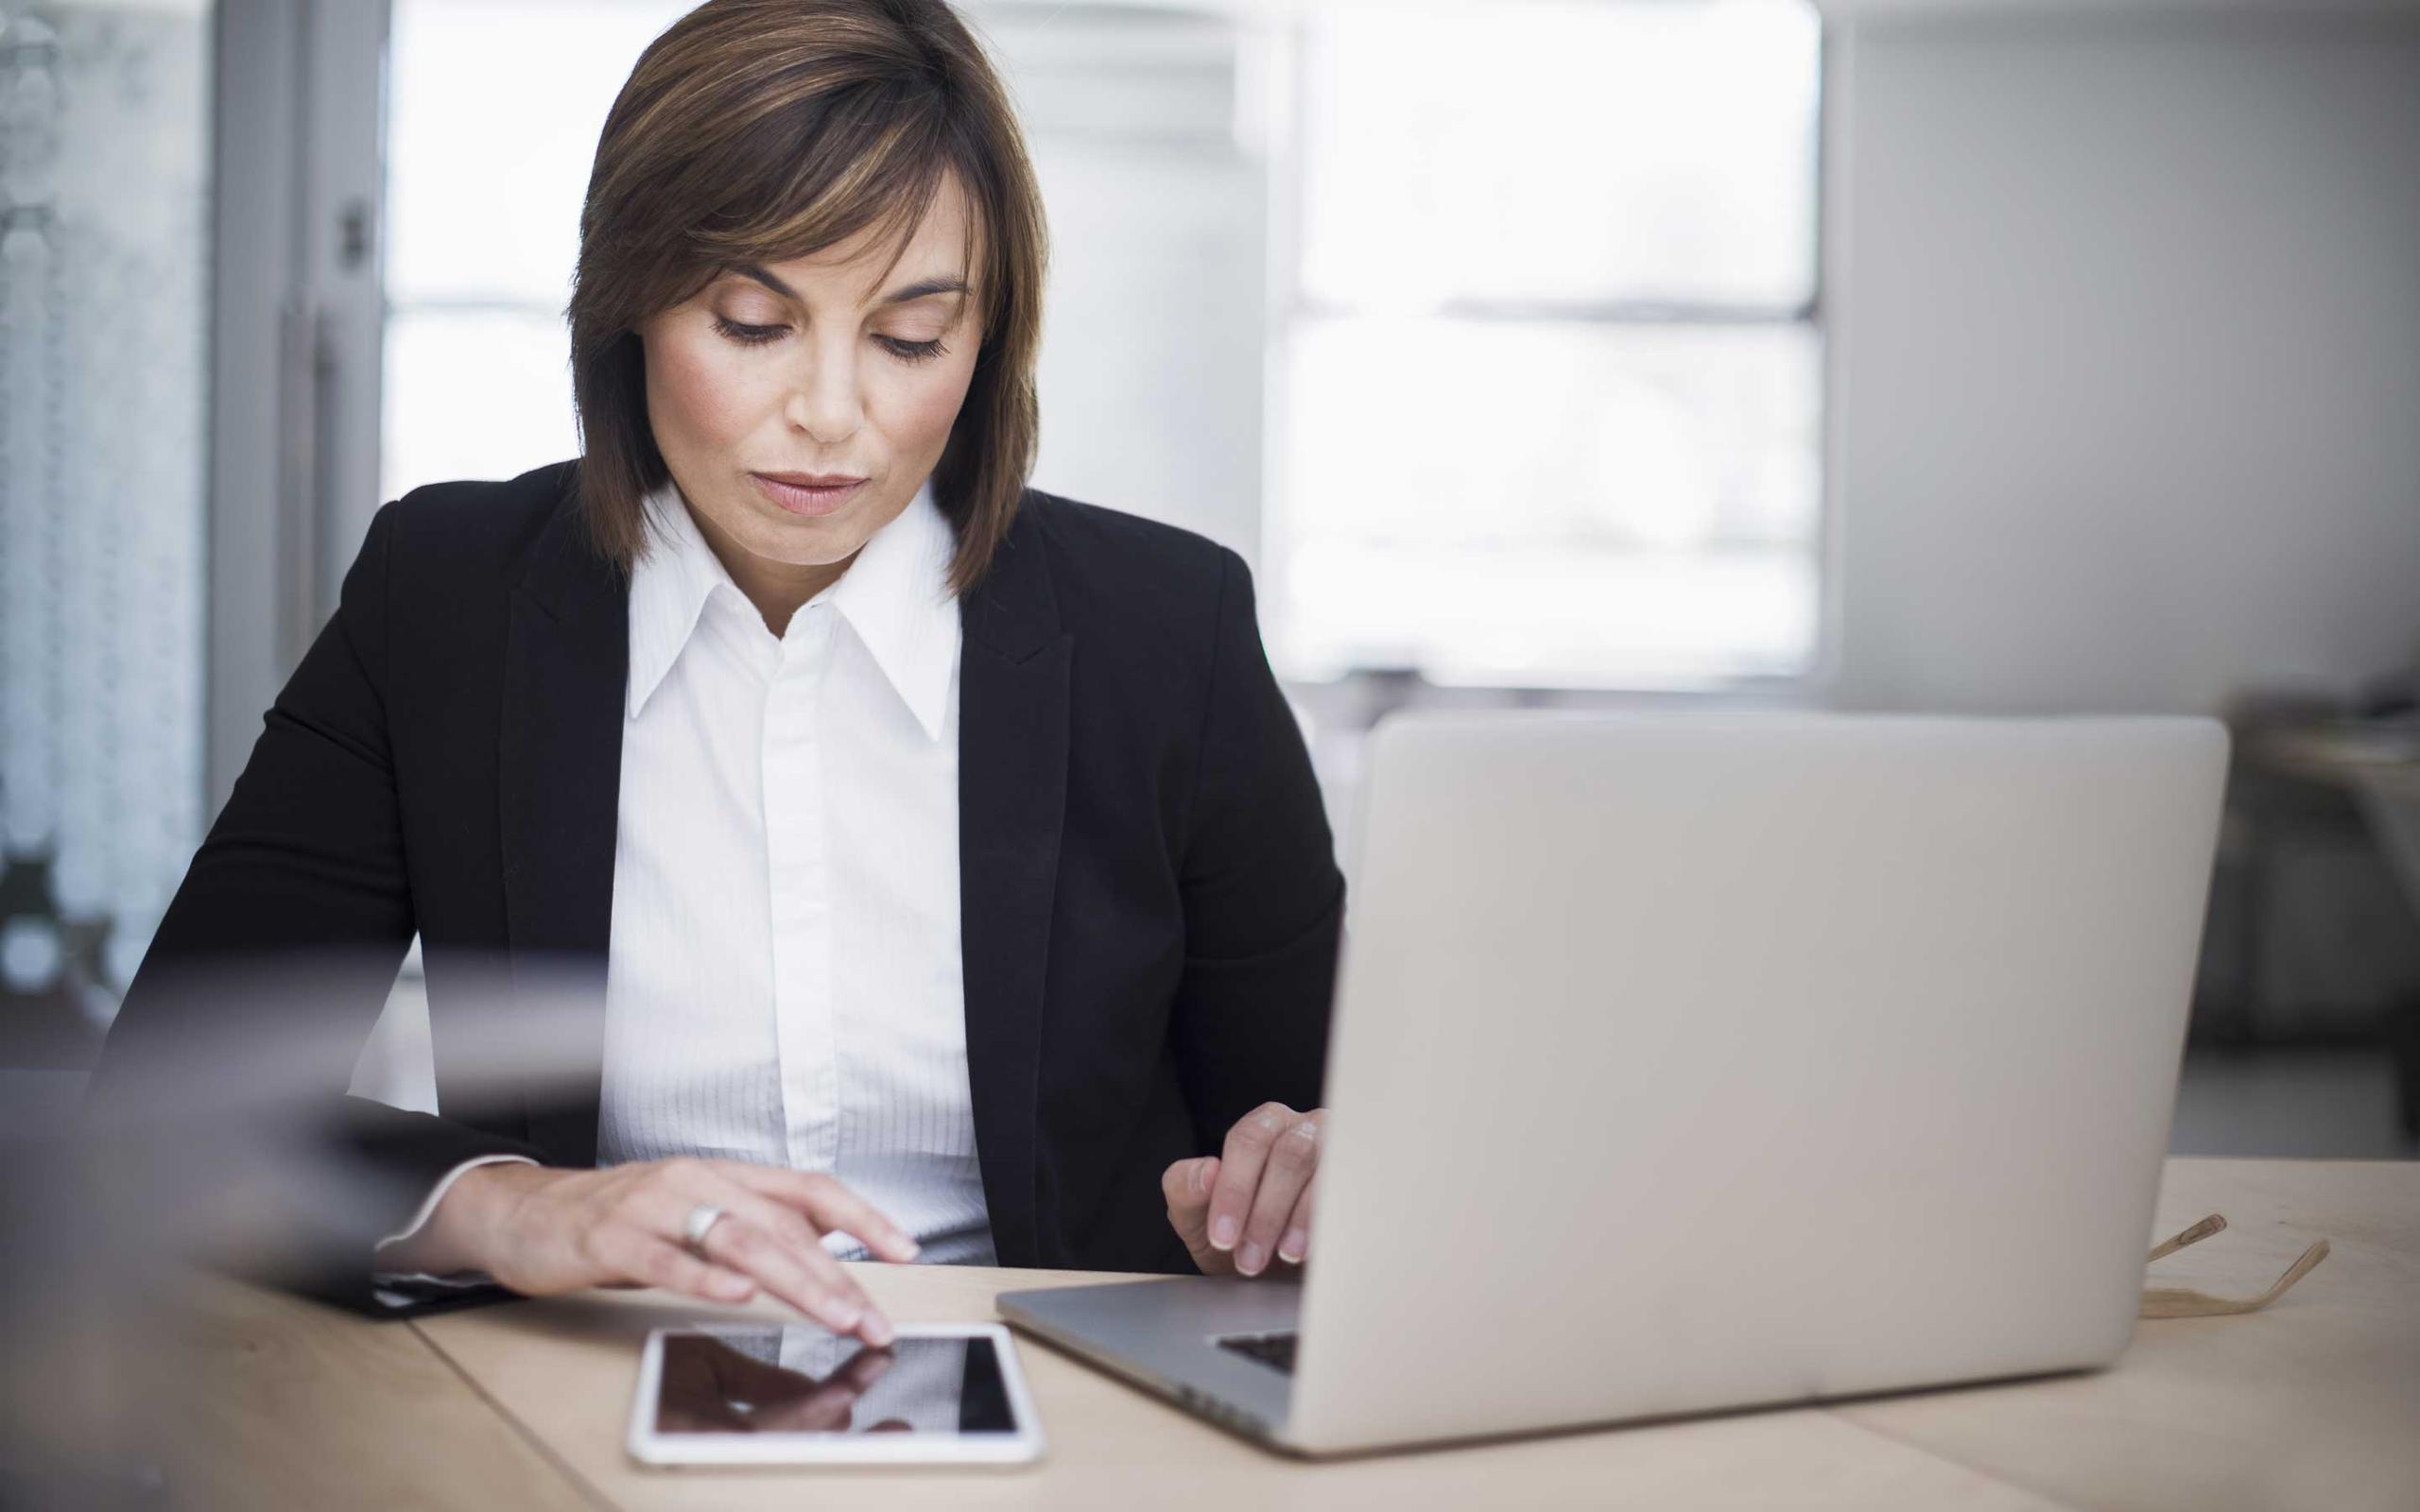 Woman sitting in front of laptop, looking at her tablet